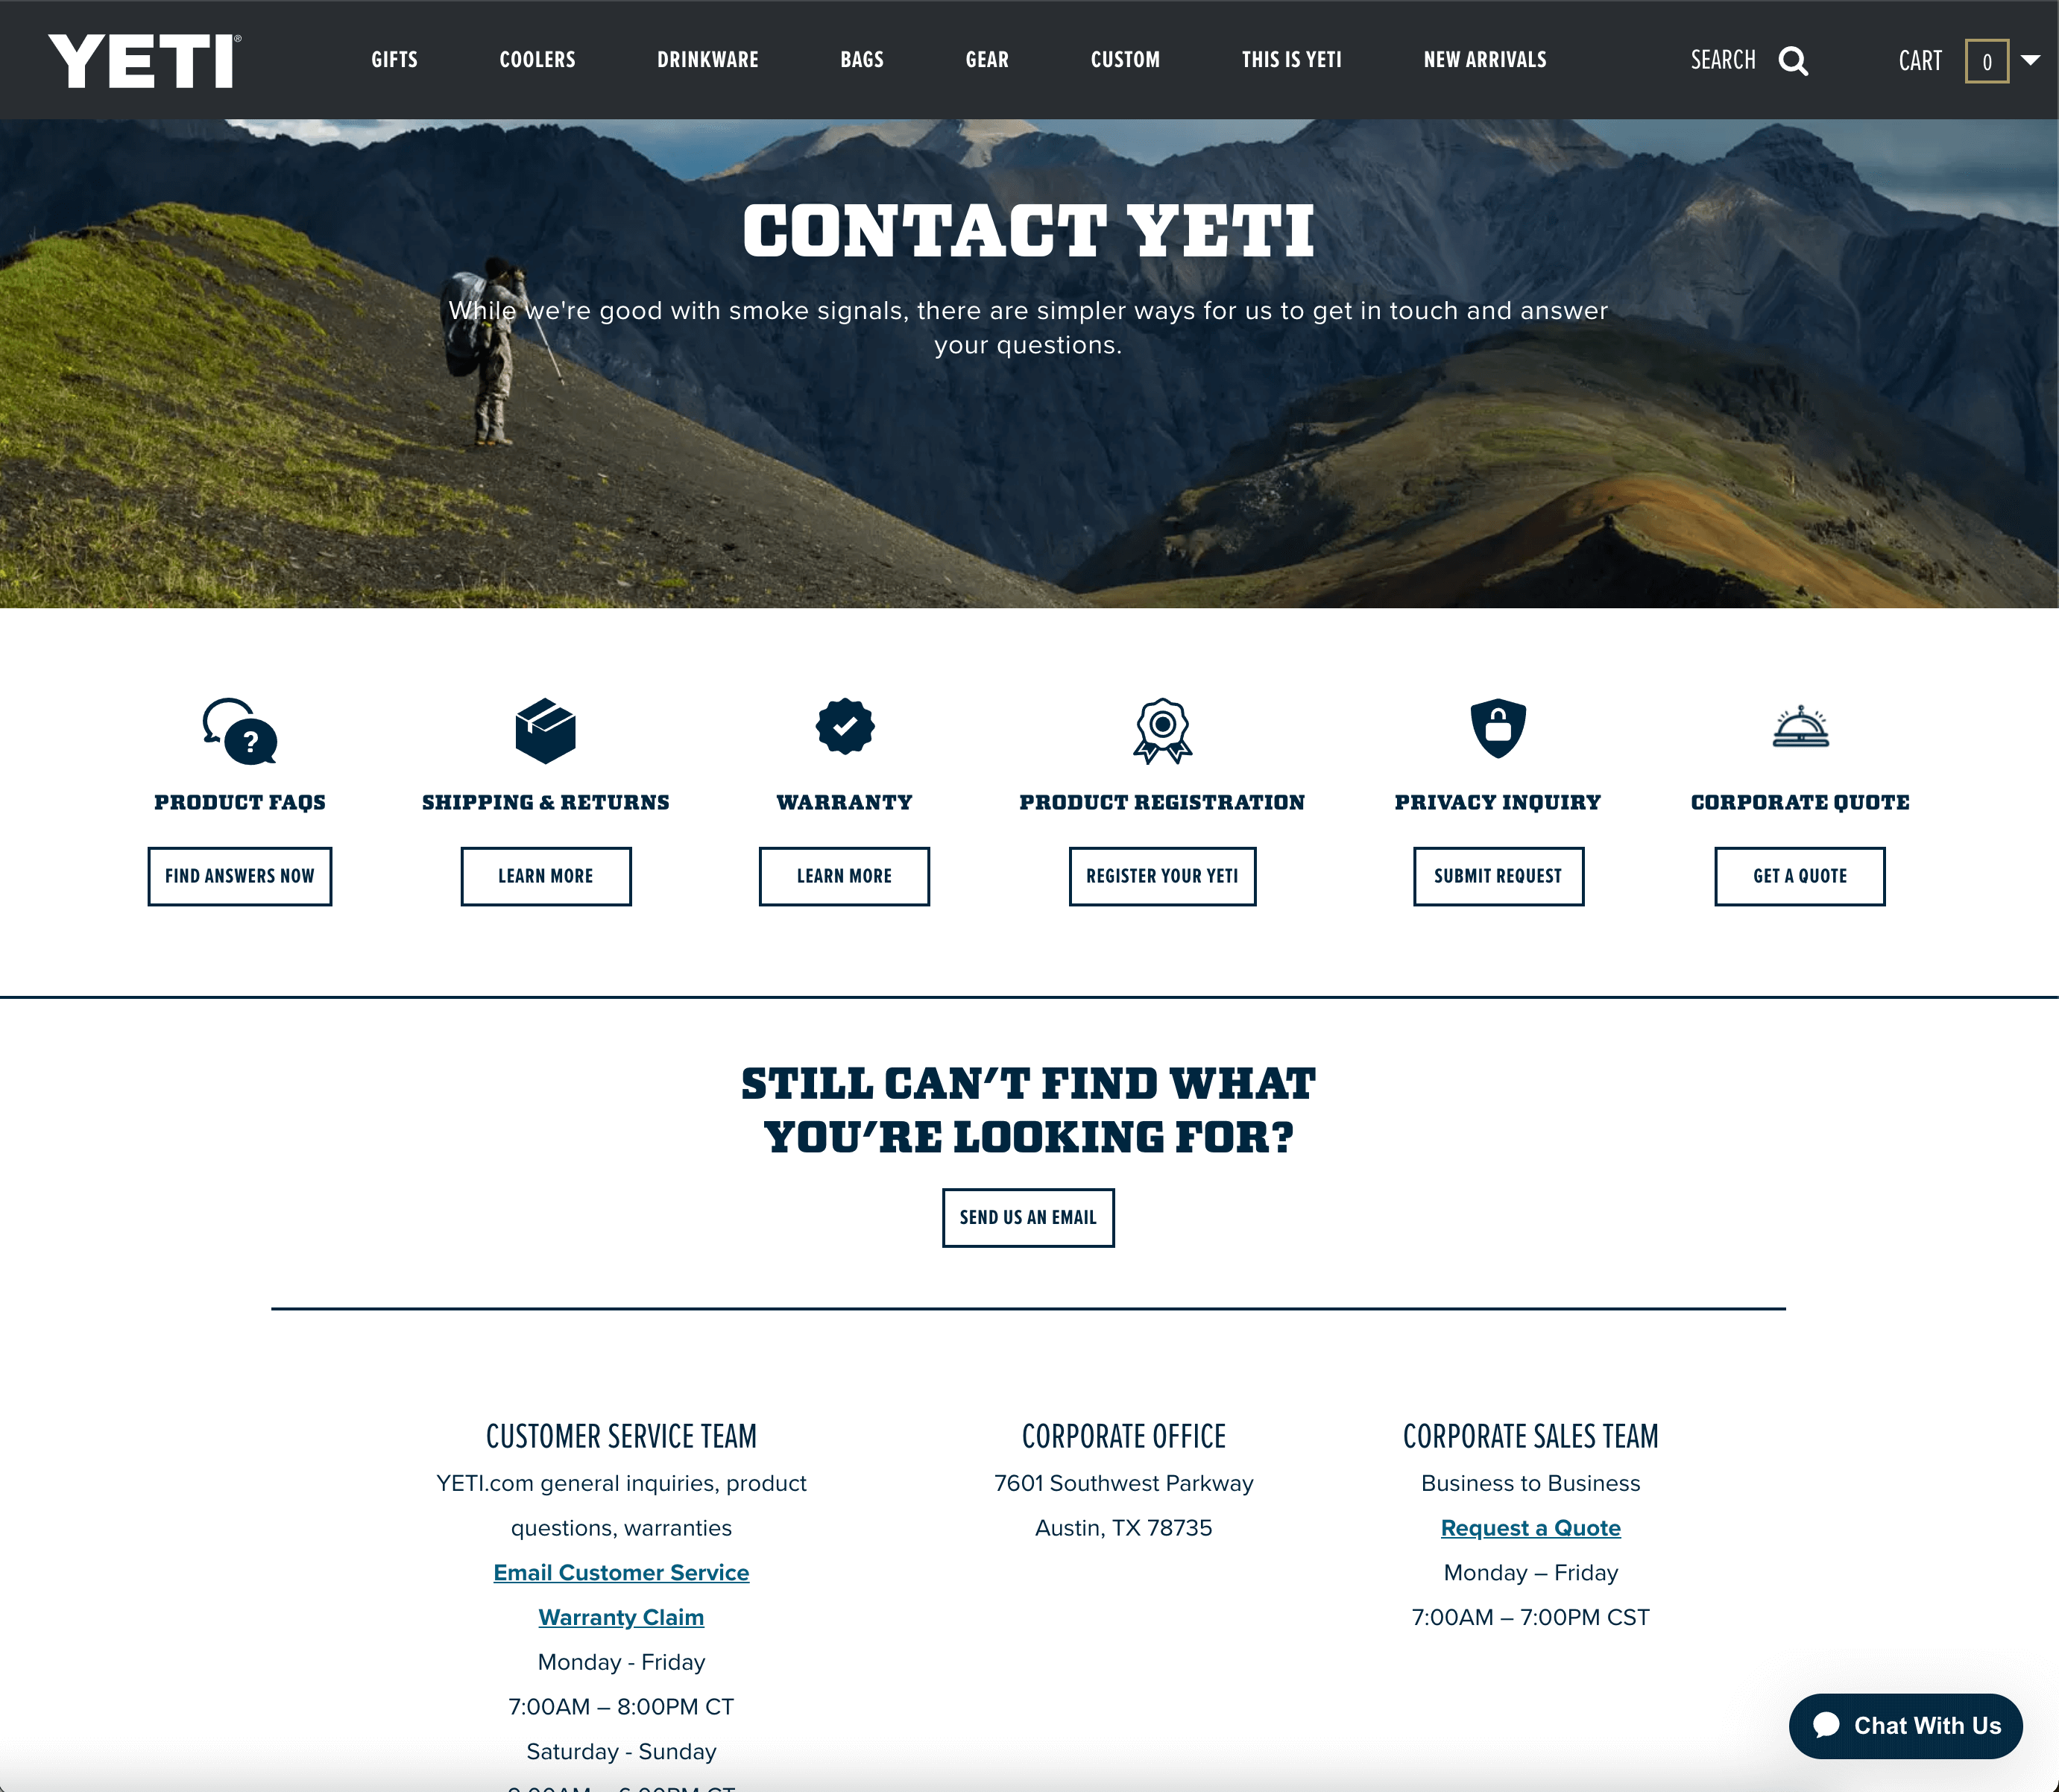 Yeti Coolers' Contact Us Page